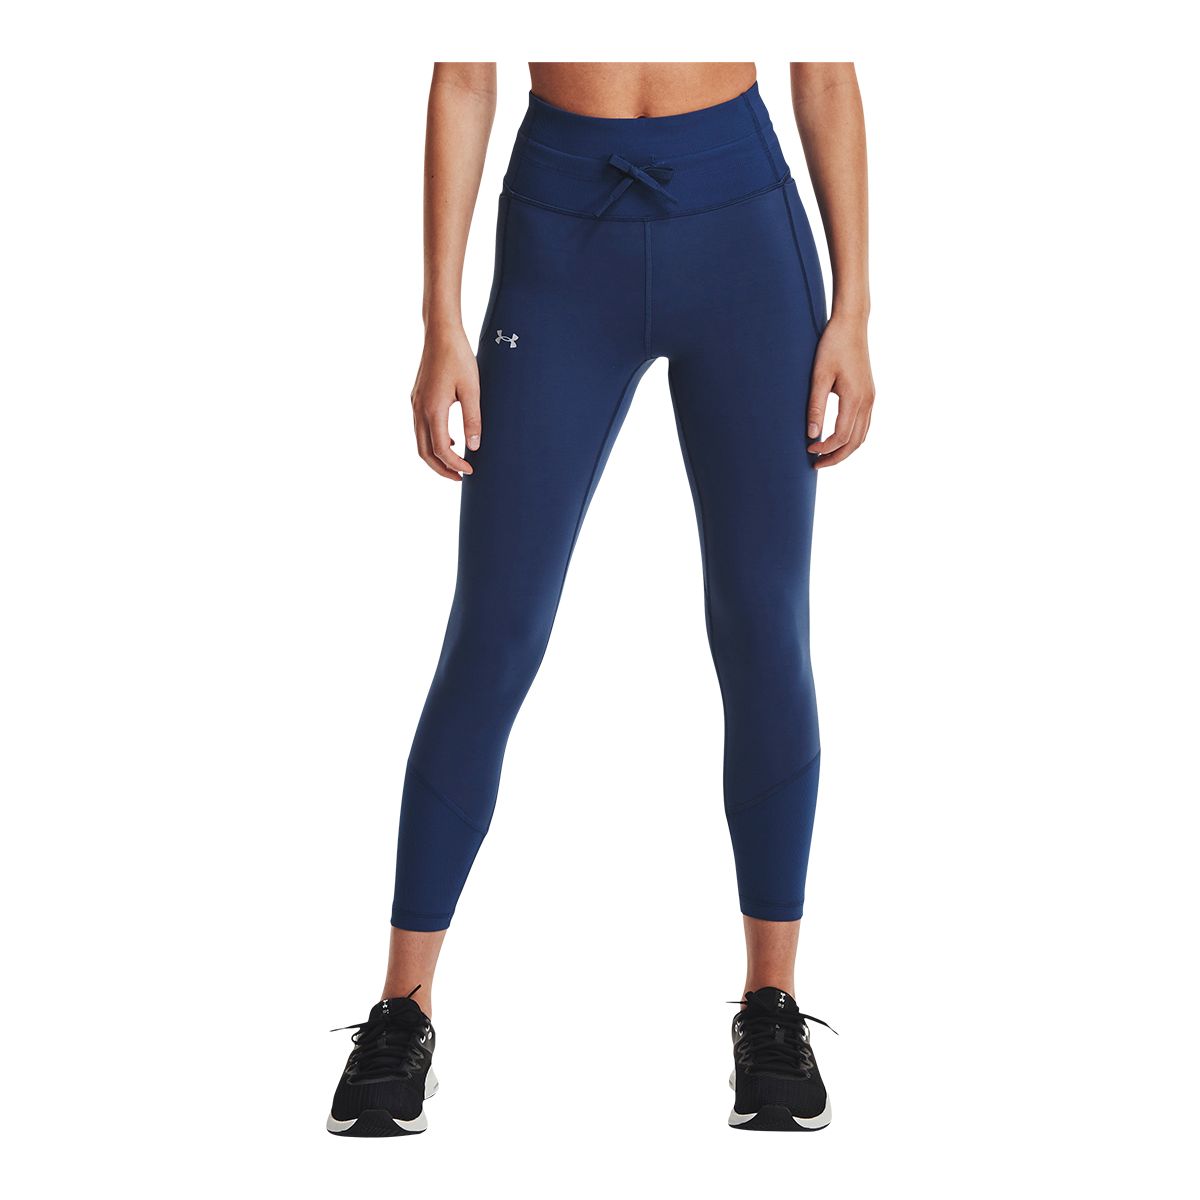 Under Armour Women's Meridian Ribbed 7/8 Tights